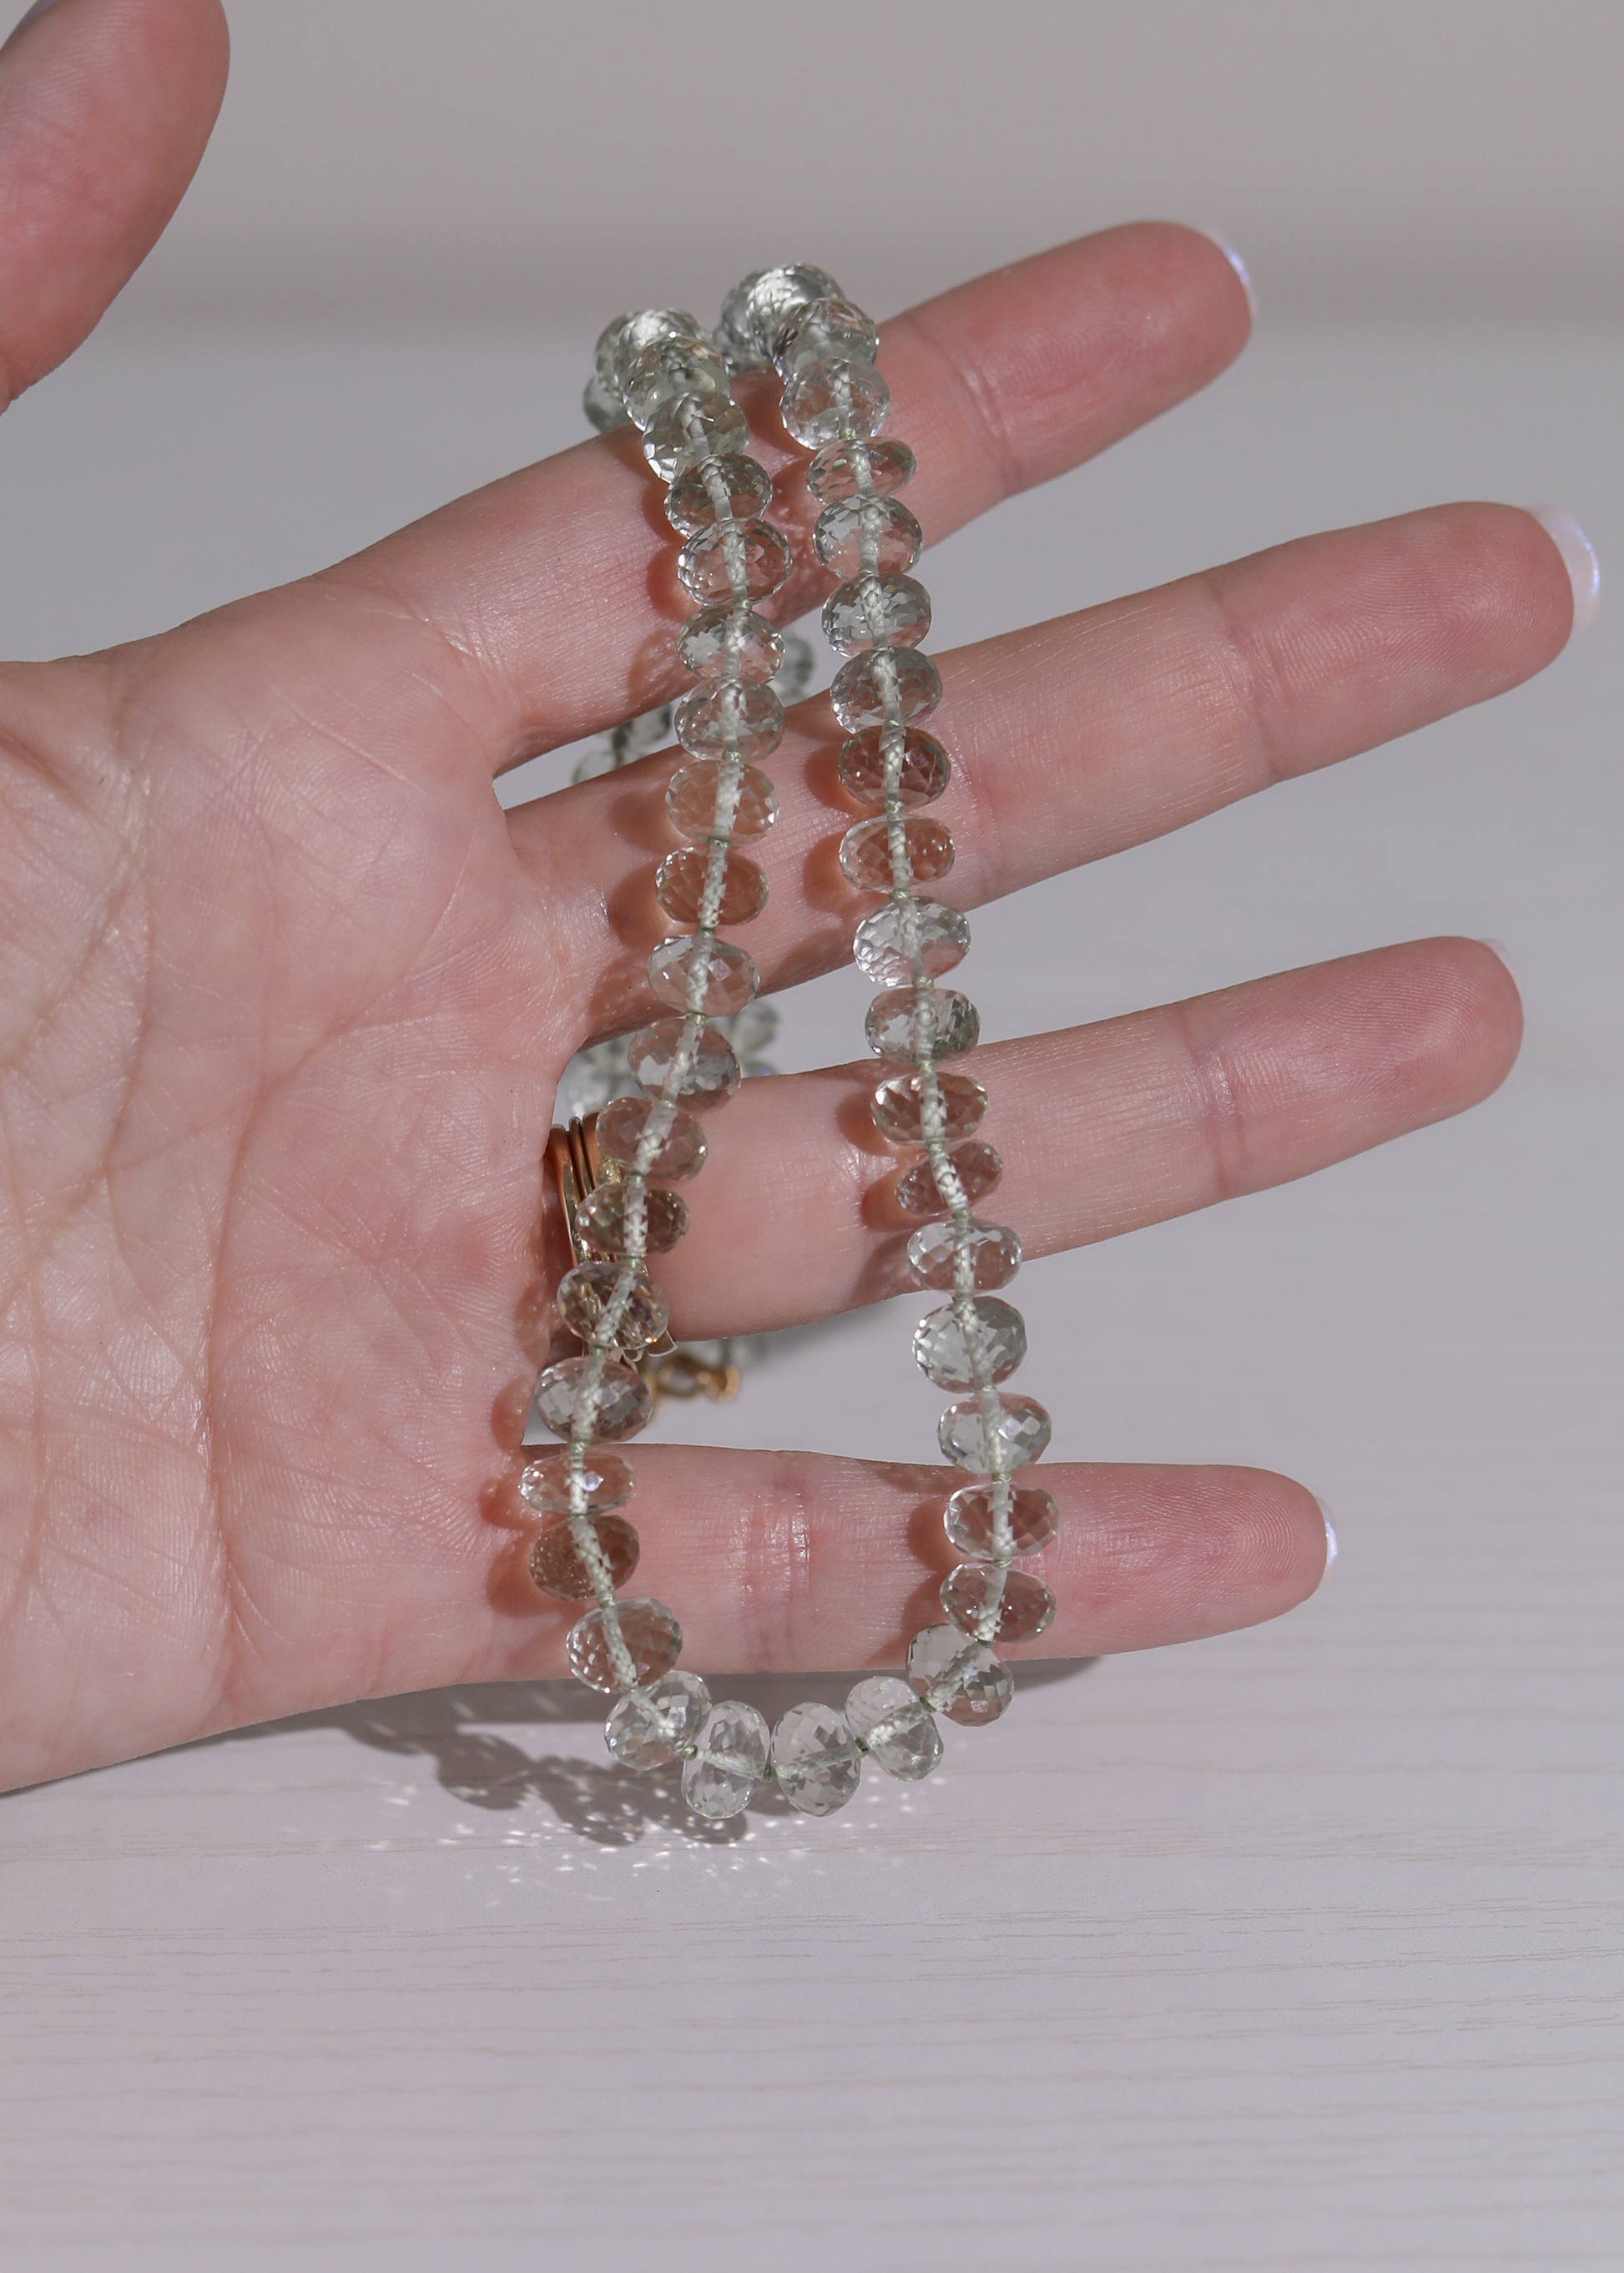 Green Amethyst Knotted Candy Bead Necklace